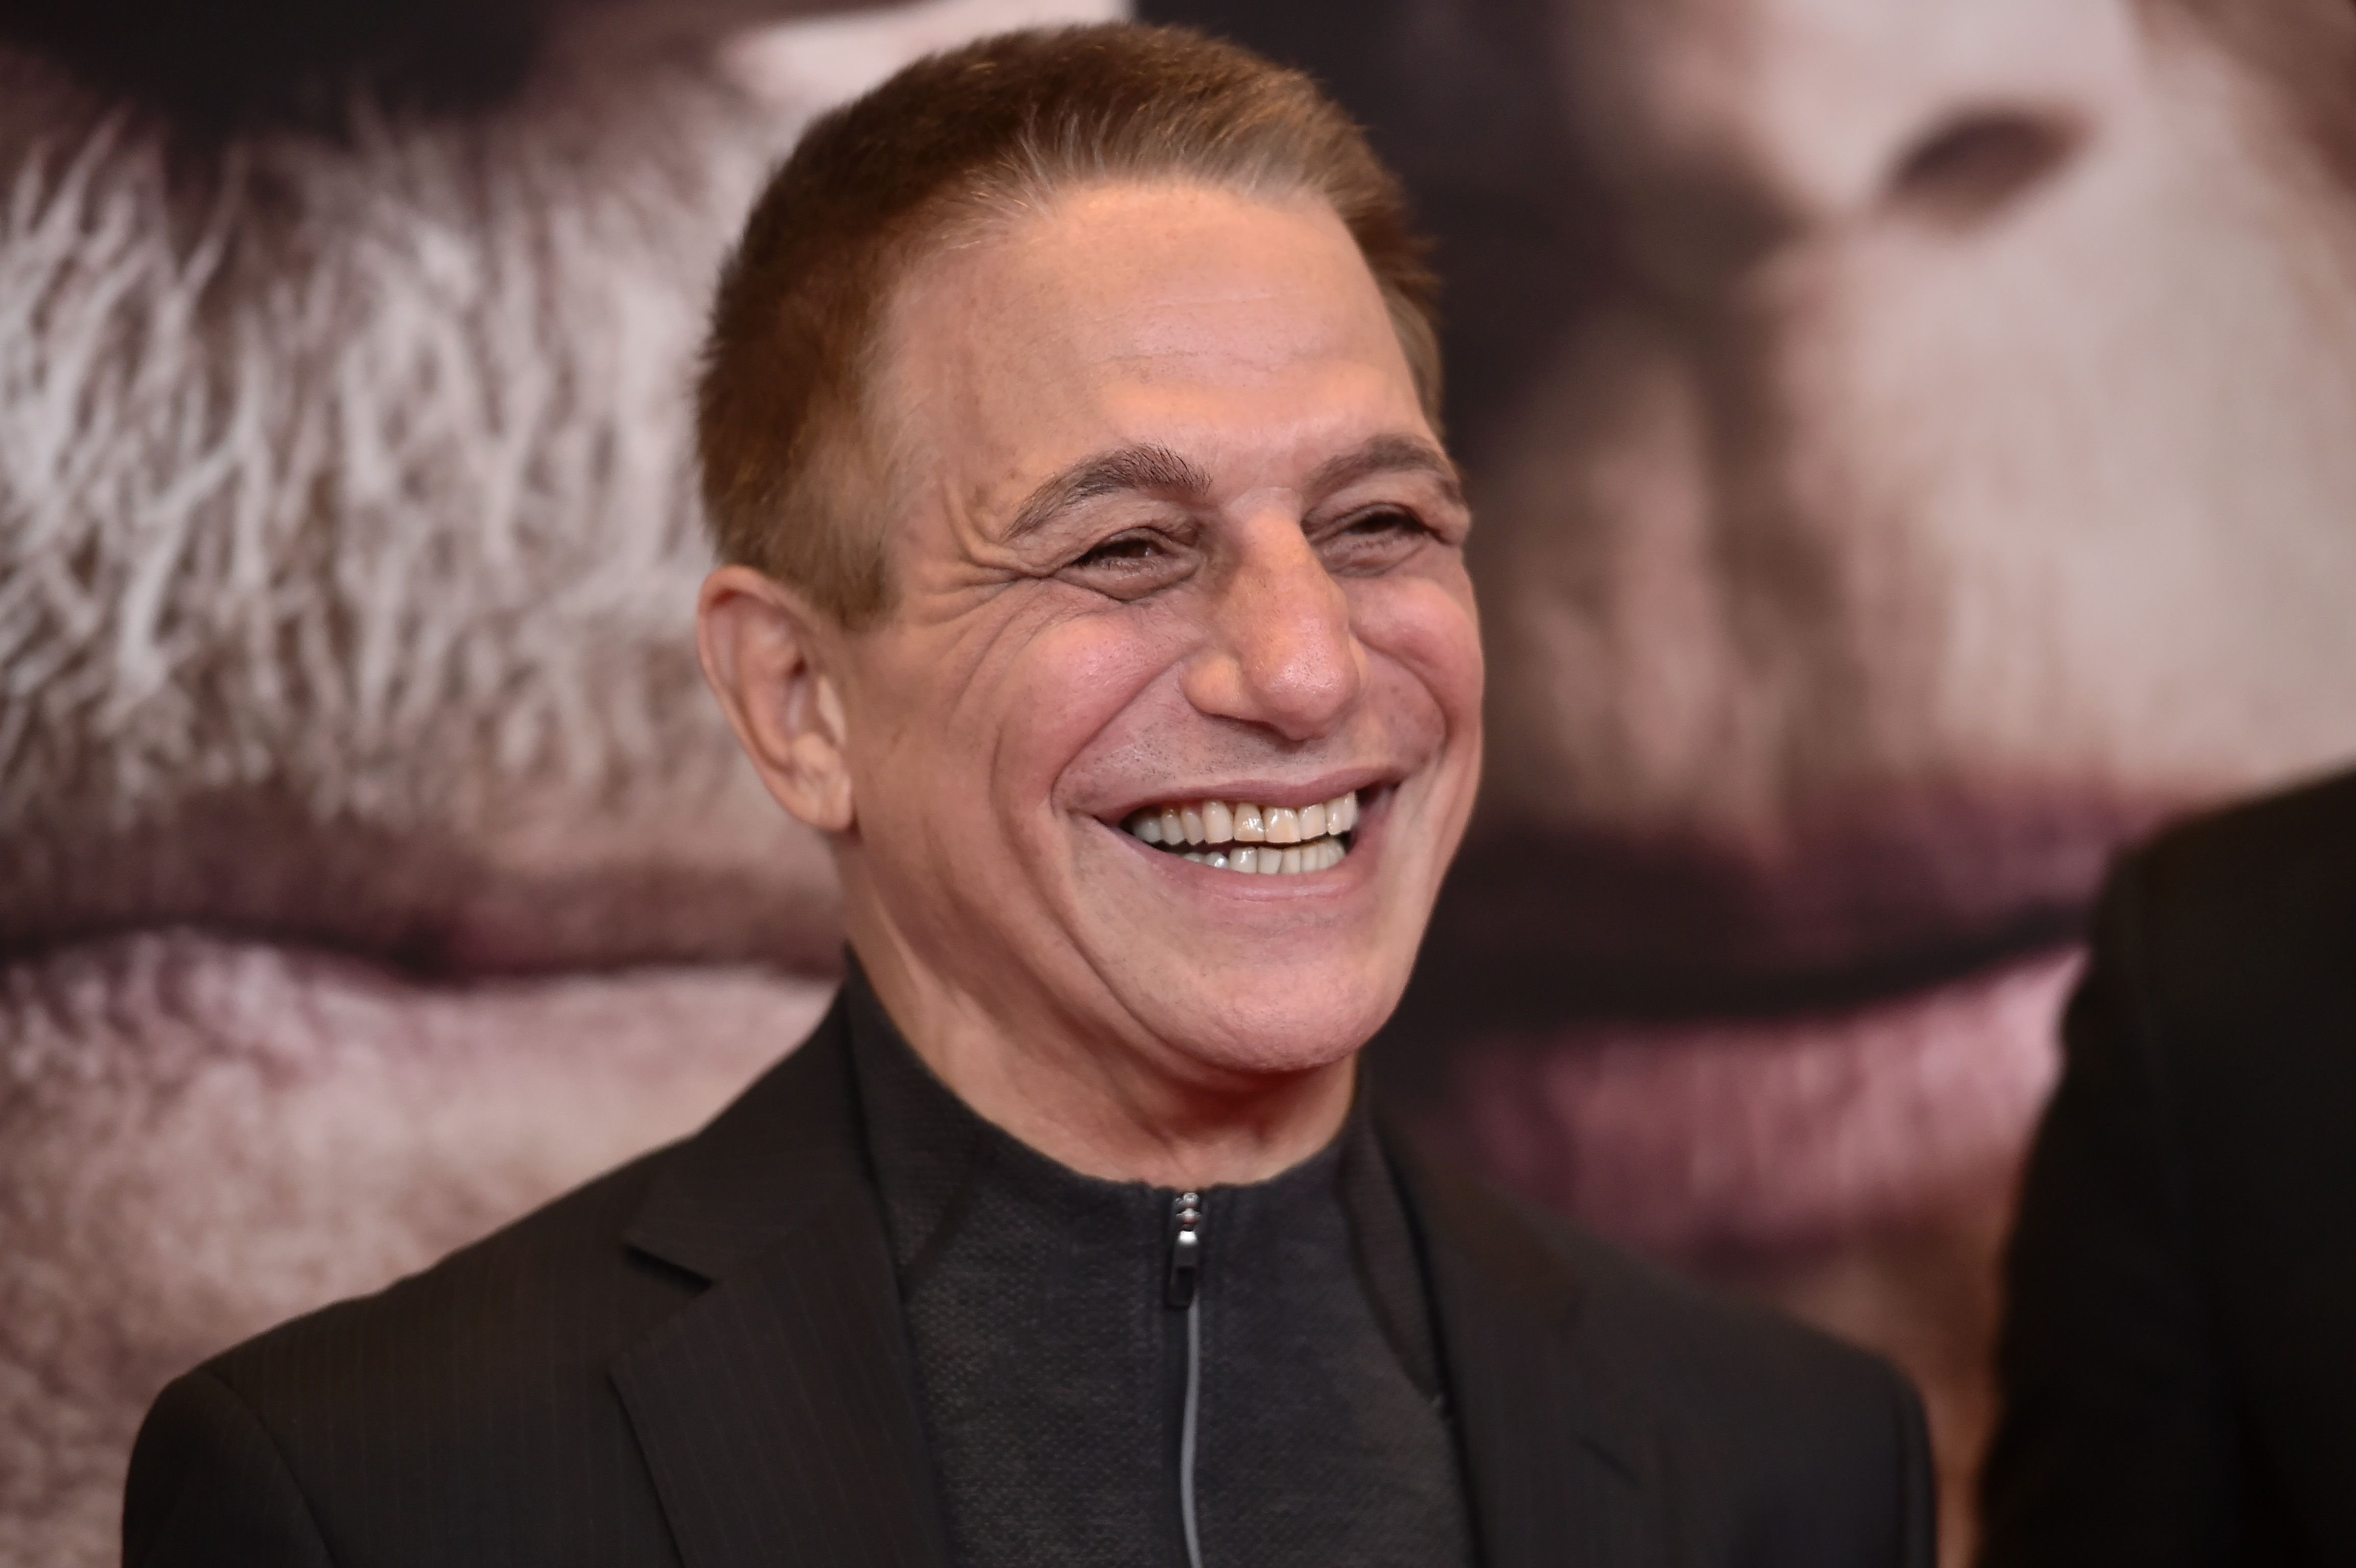 Remember 'Who's the Boss?' Star Tony Danza? Here's How He Looks at 69